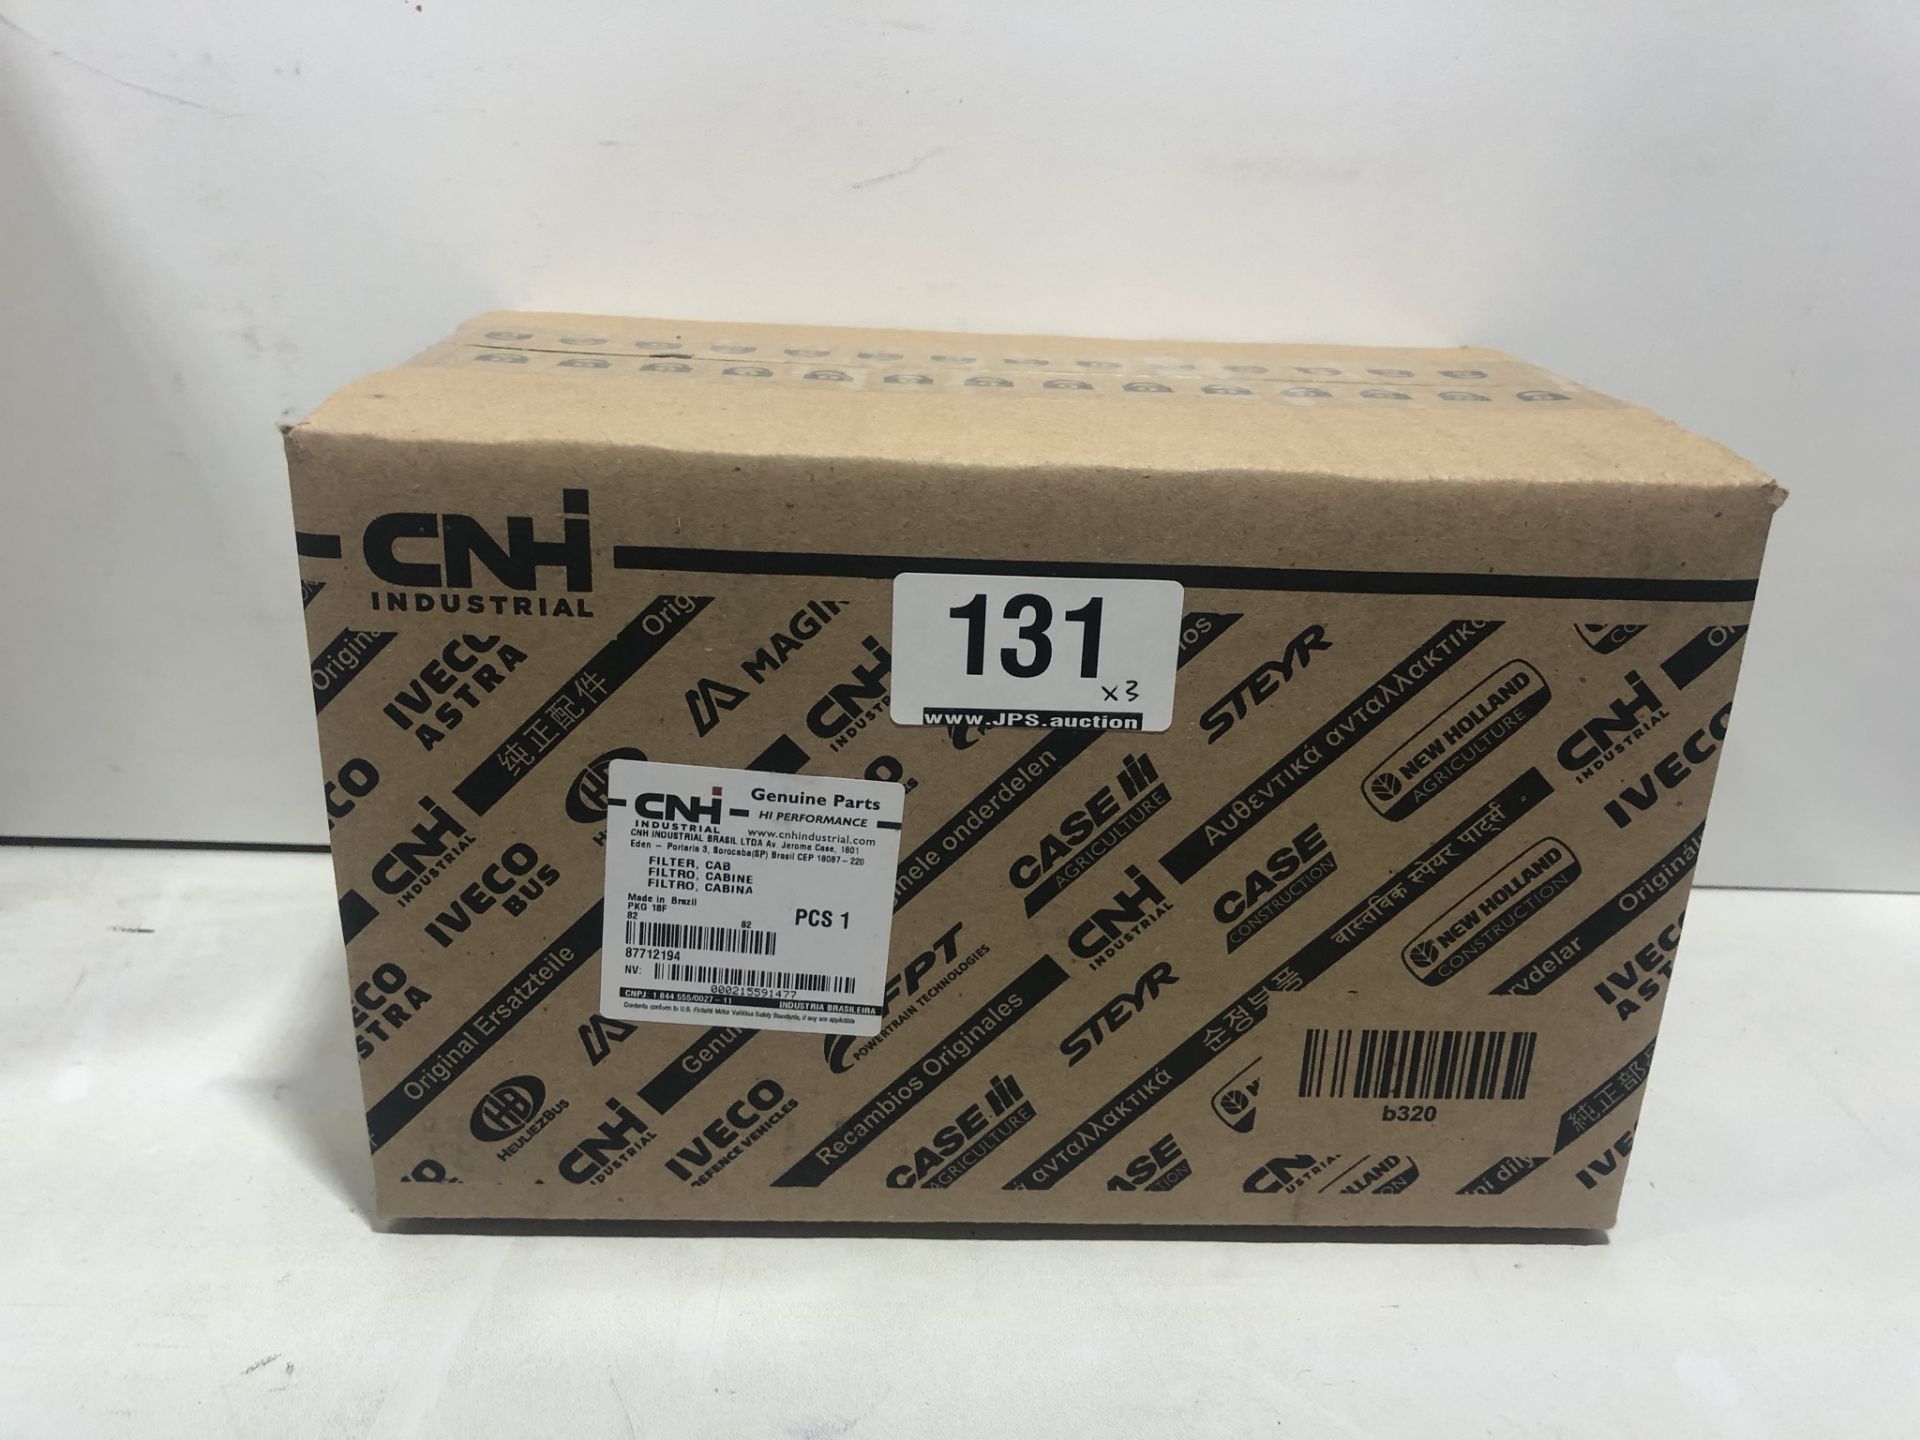 3 x CNH Cabin Filters - Image 2 of 4